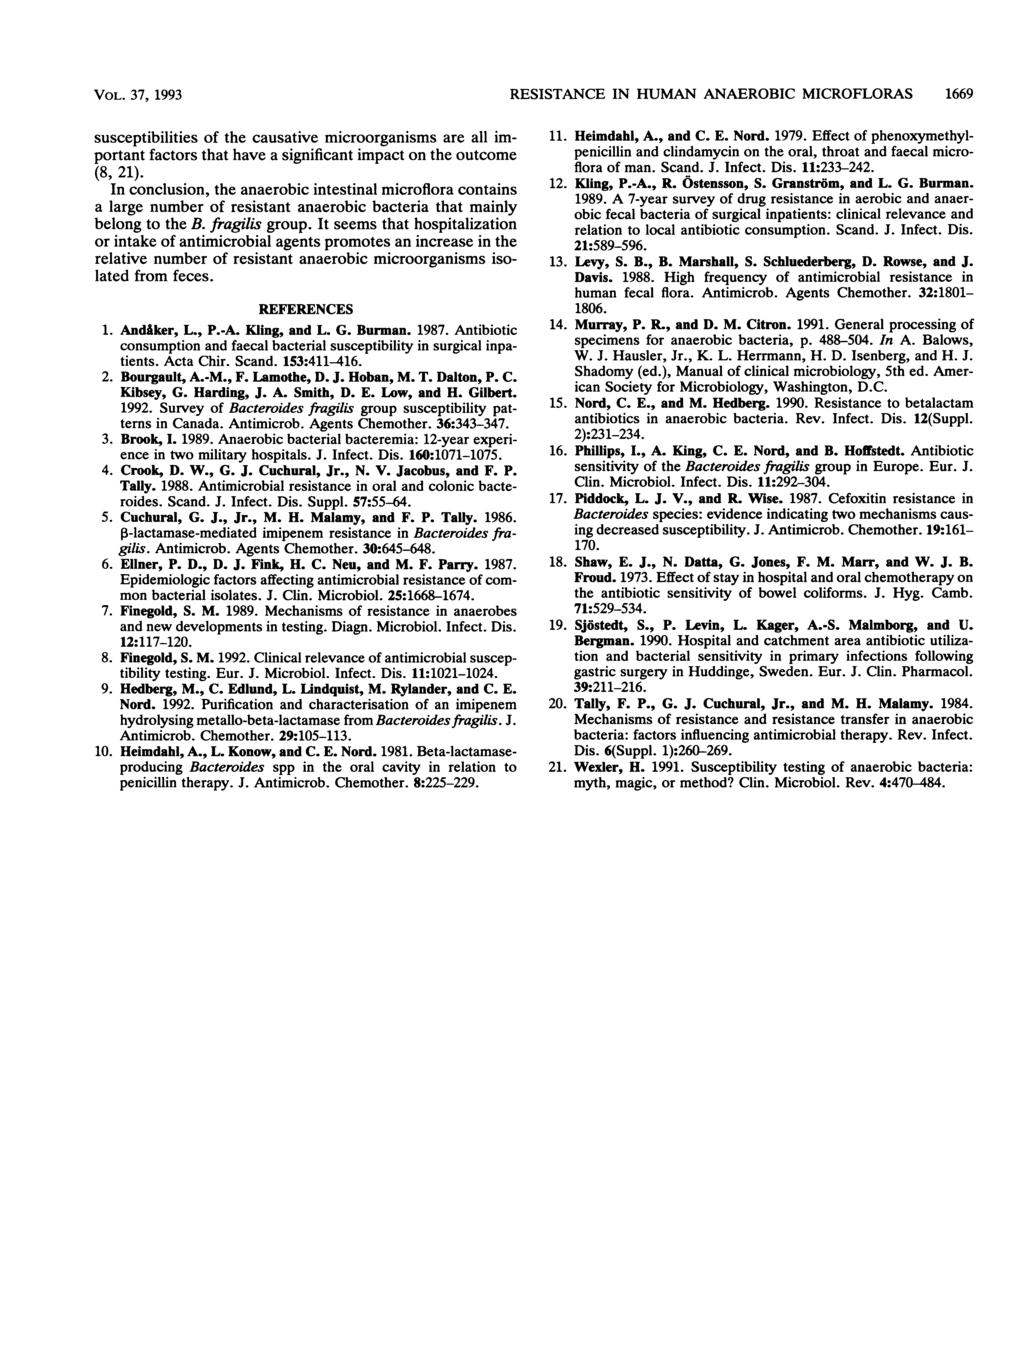 VOL. 37, 1993 RESISTANCE IN HUMAN ANAEROBIC MICROFLORAS 1669 susceptibilities of the causative microorganisms are all important factors that have a significant impact on the outcome (8, 21).